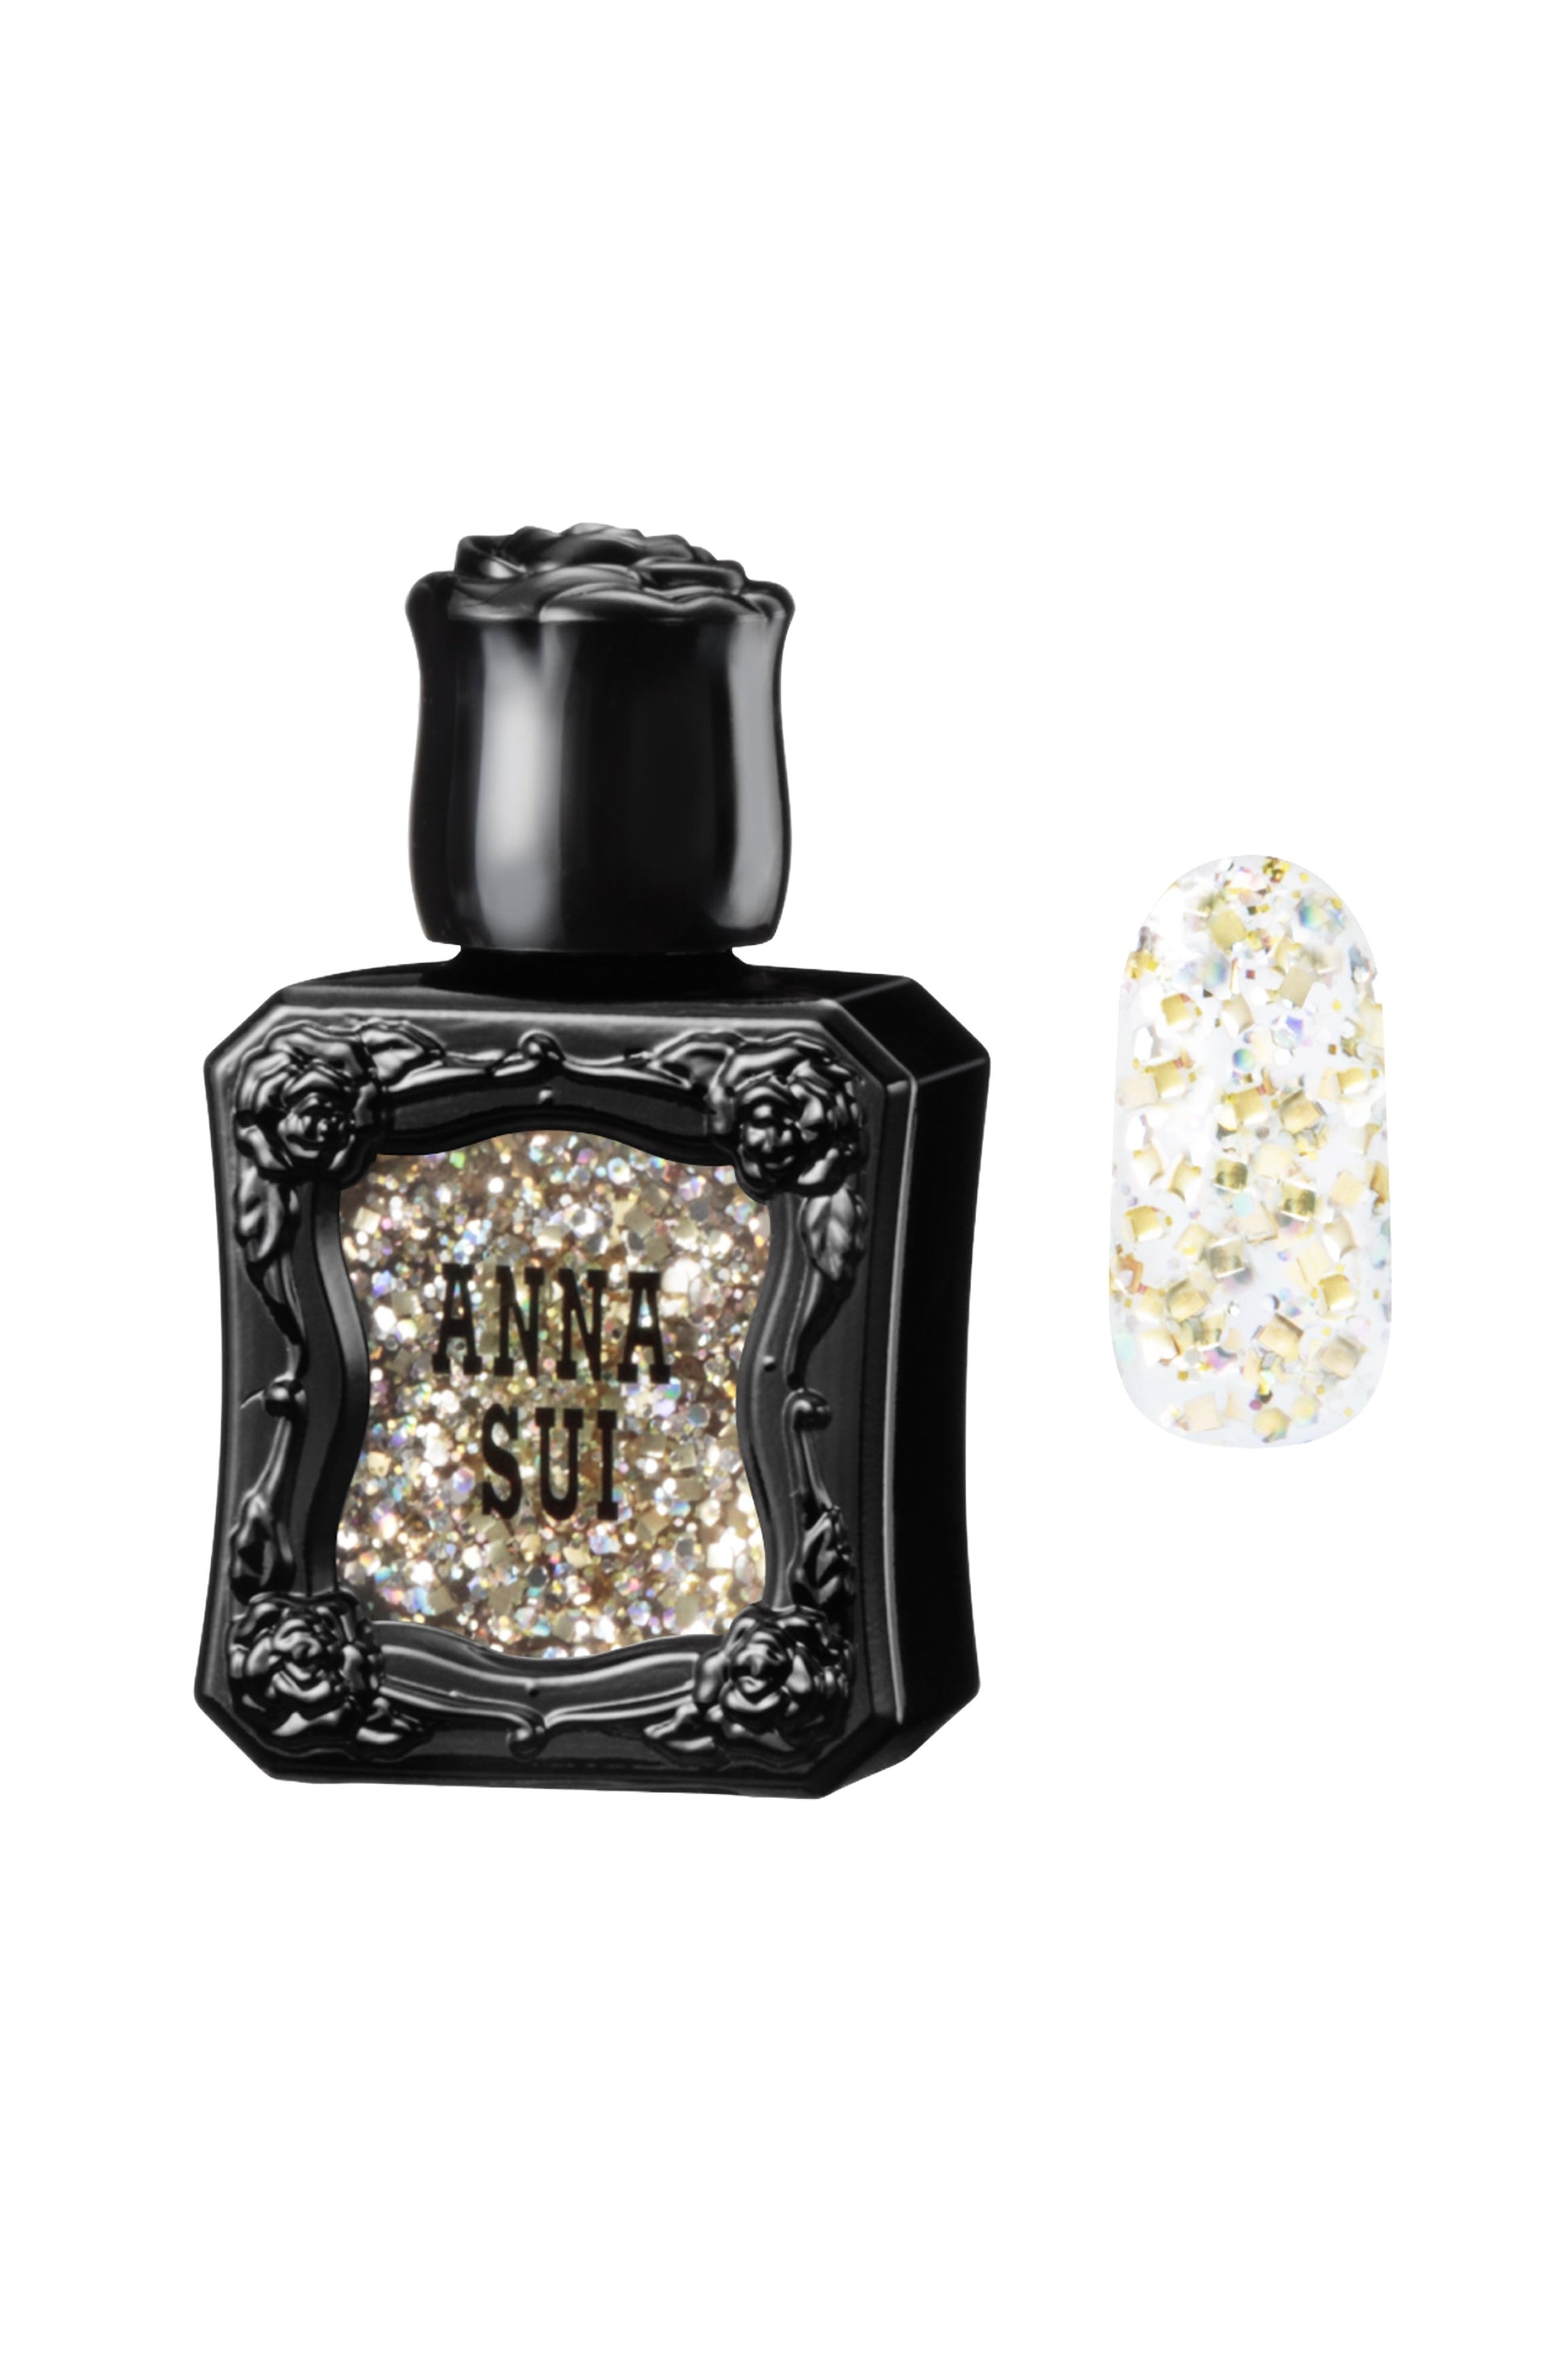 Black container with raised rose pattern, Anna Sui on GOLD, AND SILVER LAME